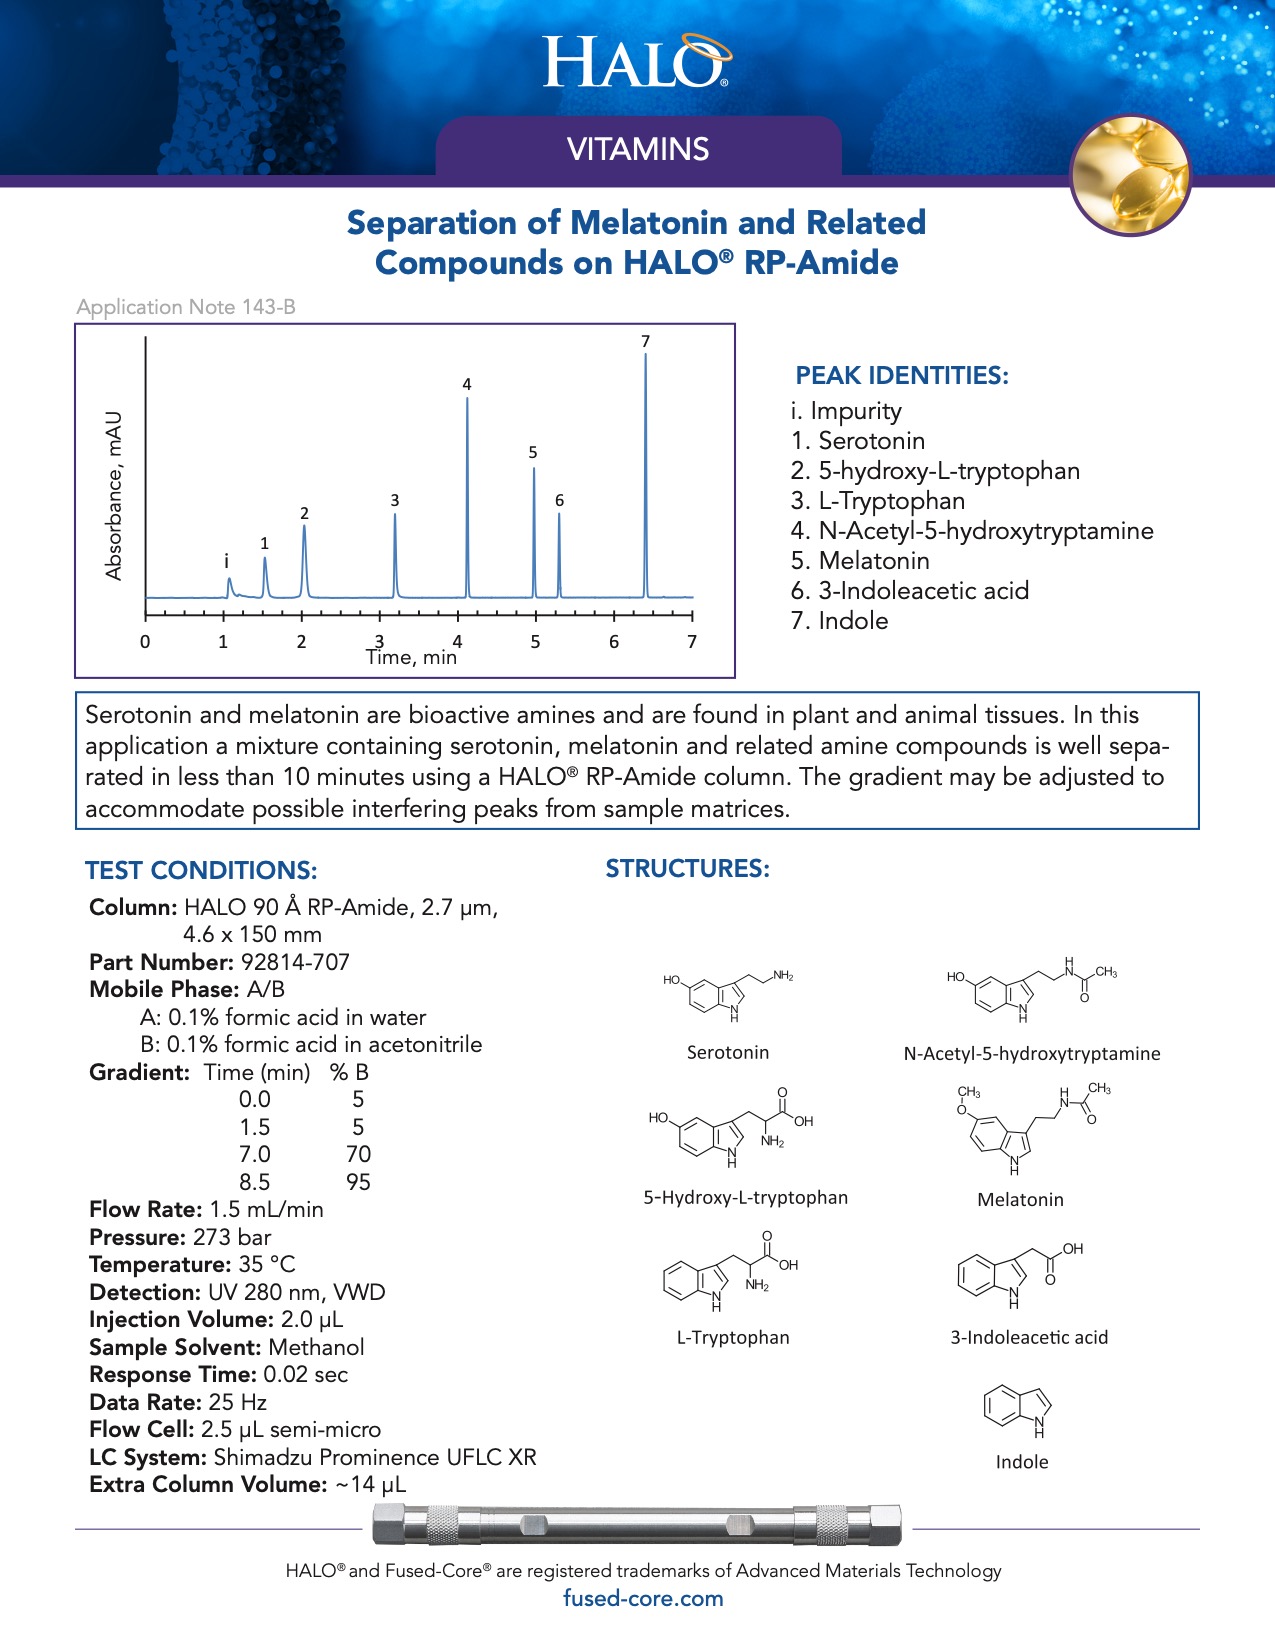 separation of melatonin and related compounds on halo rp